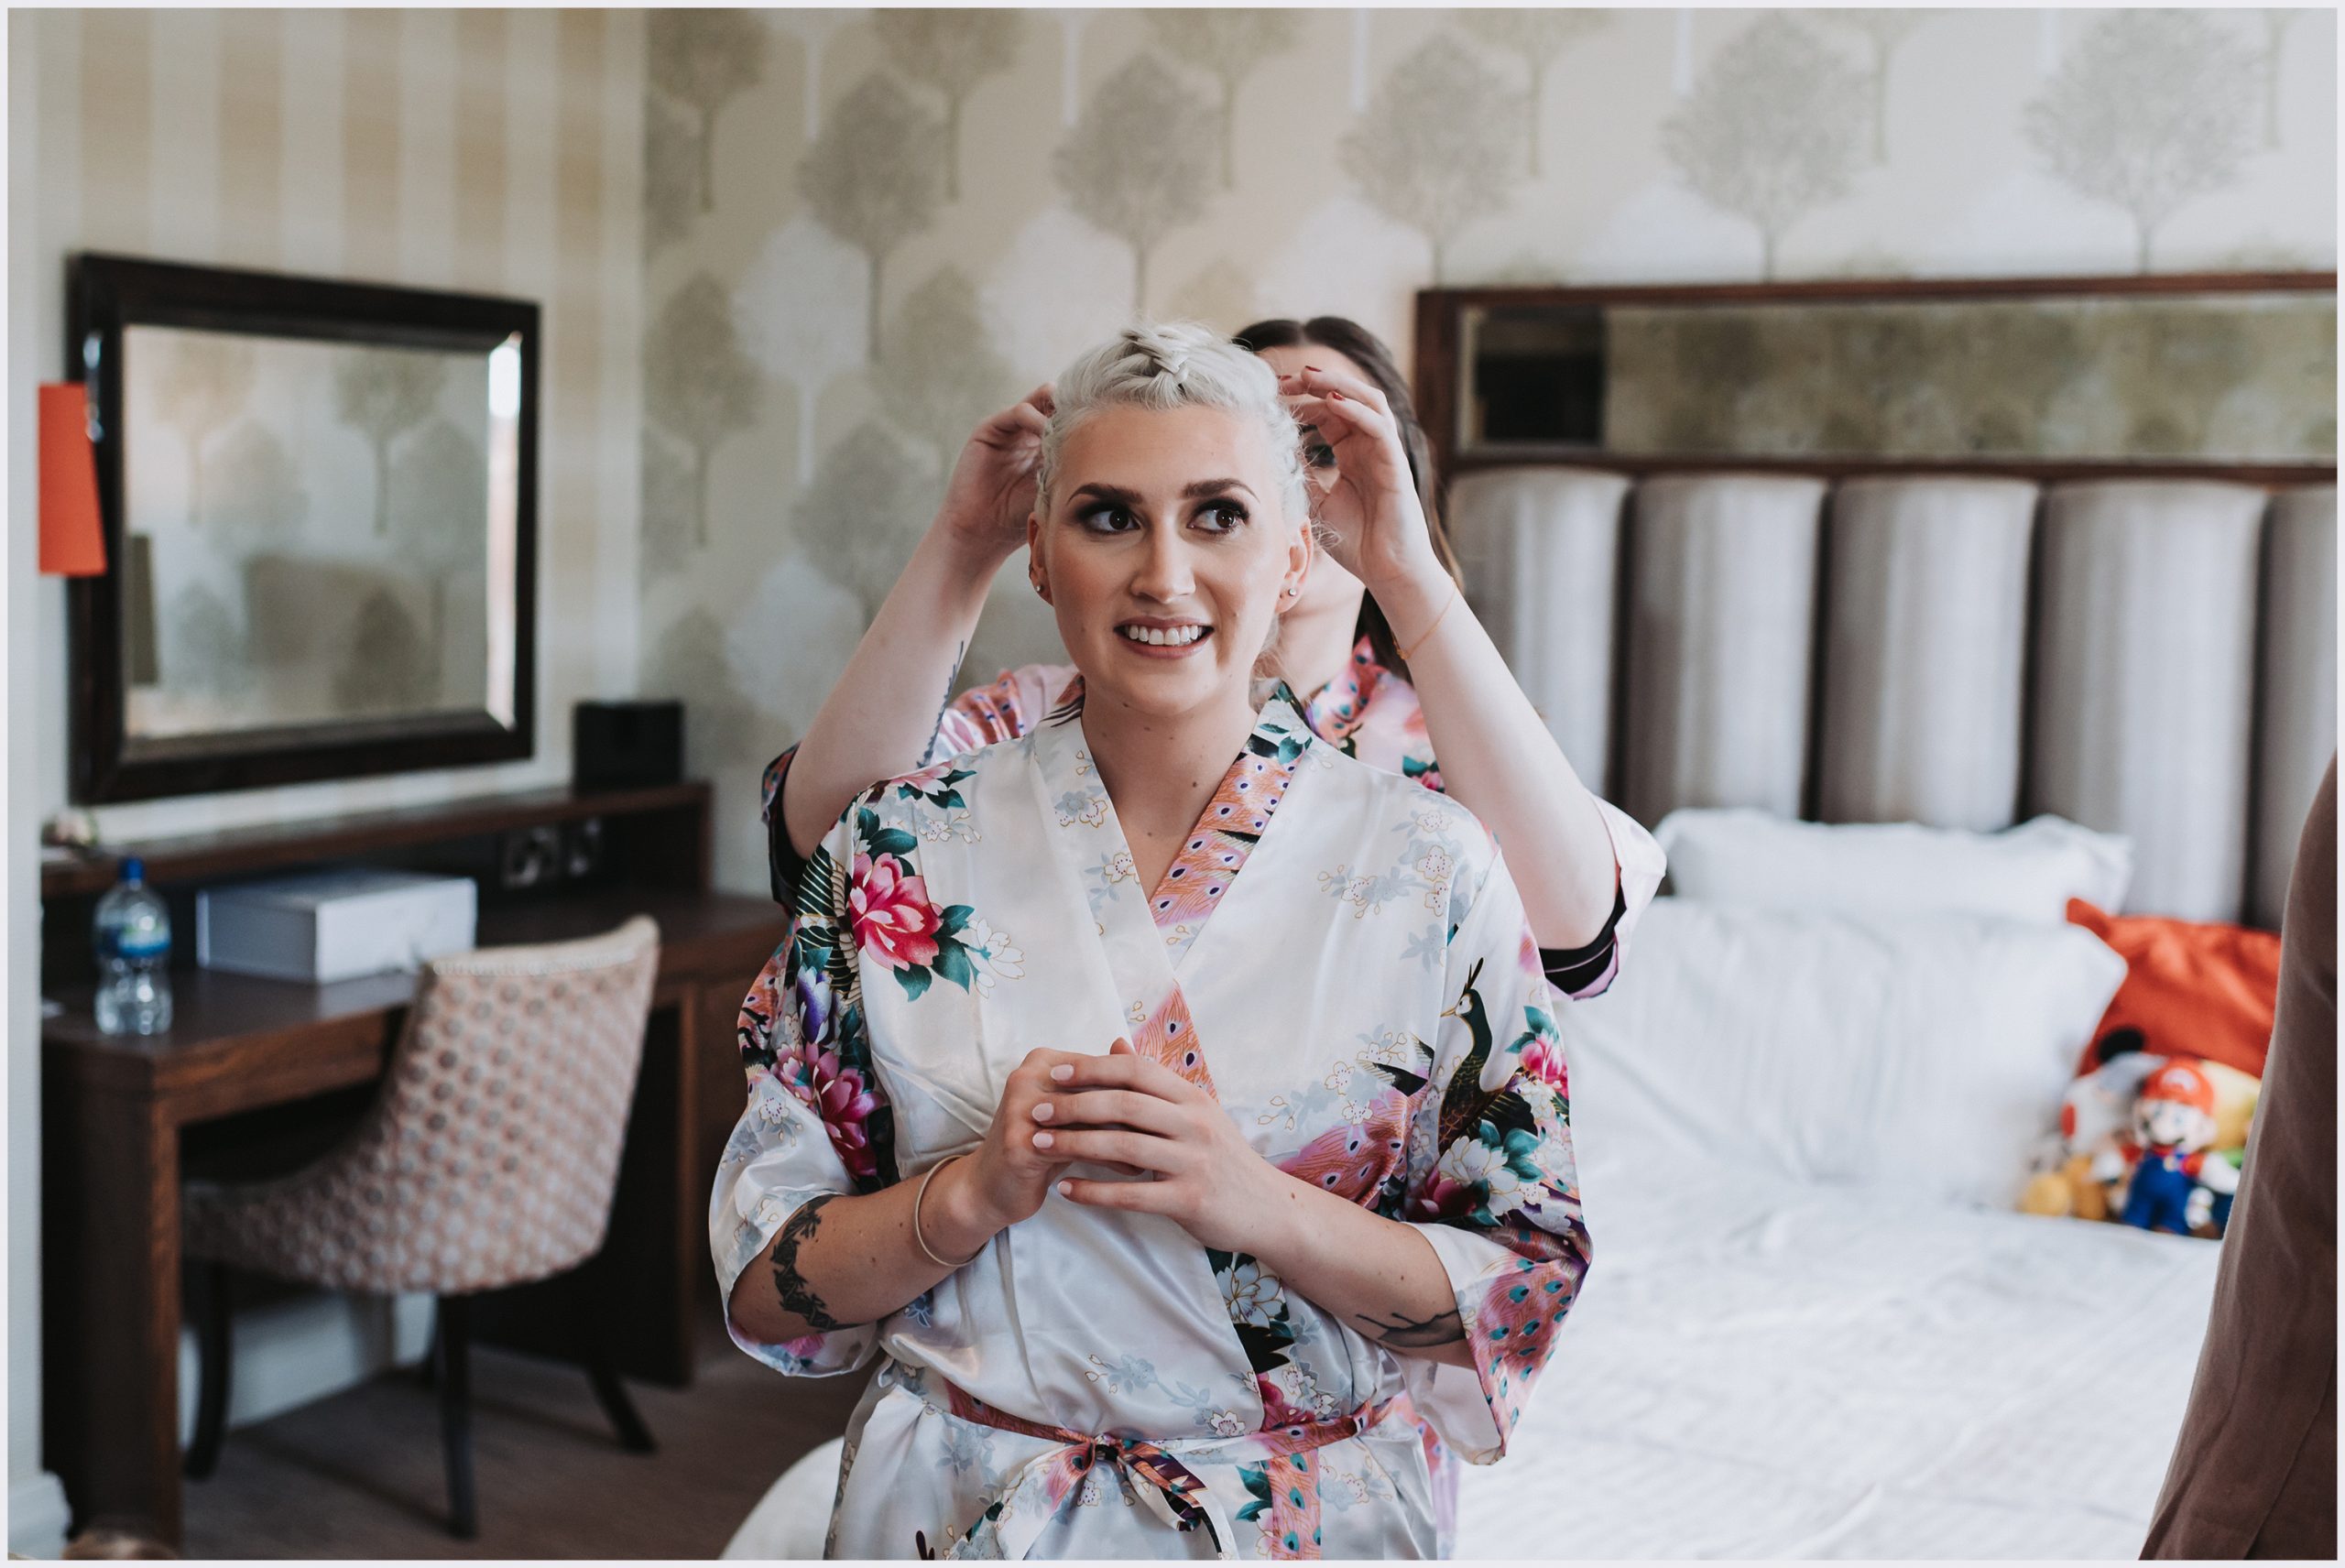 A gorgeous bride is helped by her bridesmaid to get dressed in their dressing roomm on the morning of her wedding.  Image captured by Helena Jayne Photography, a wedding photographer based in north Wales